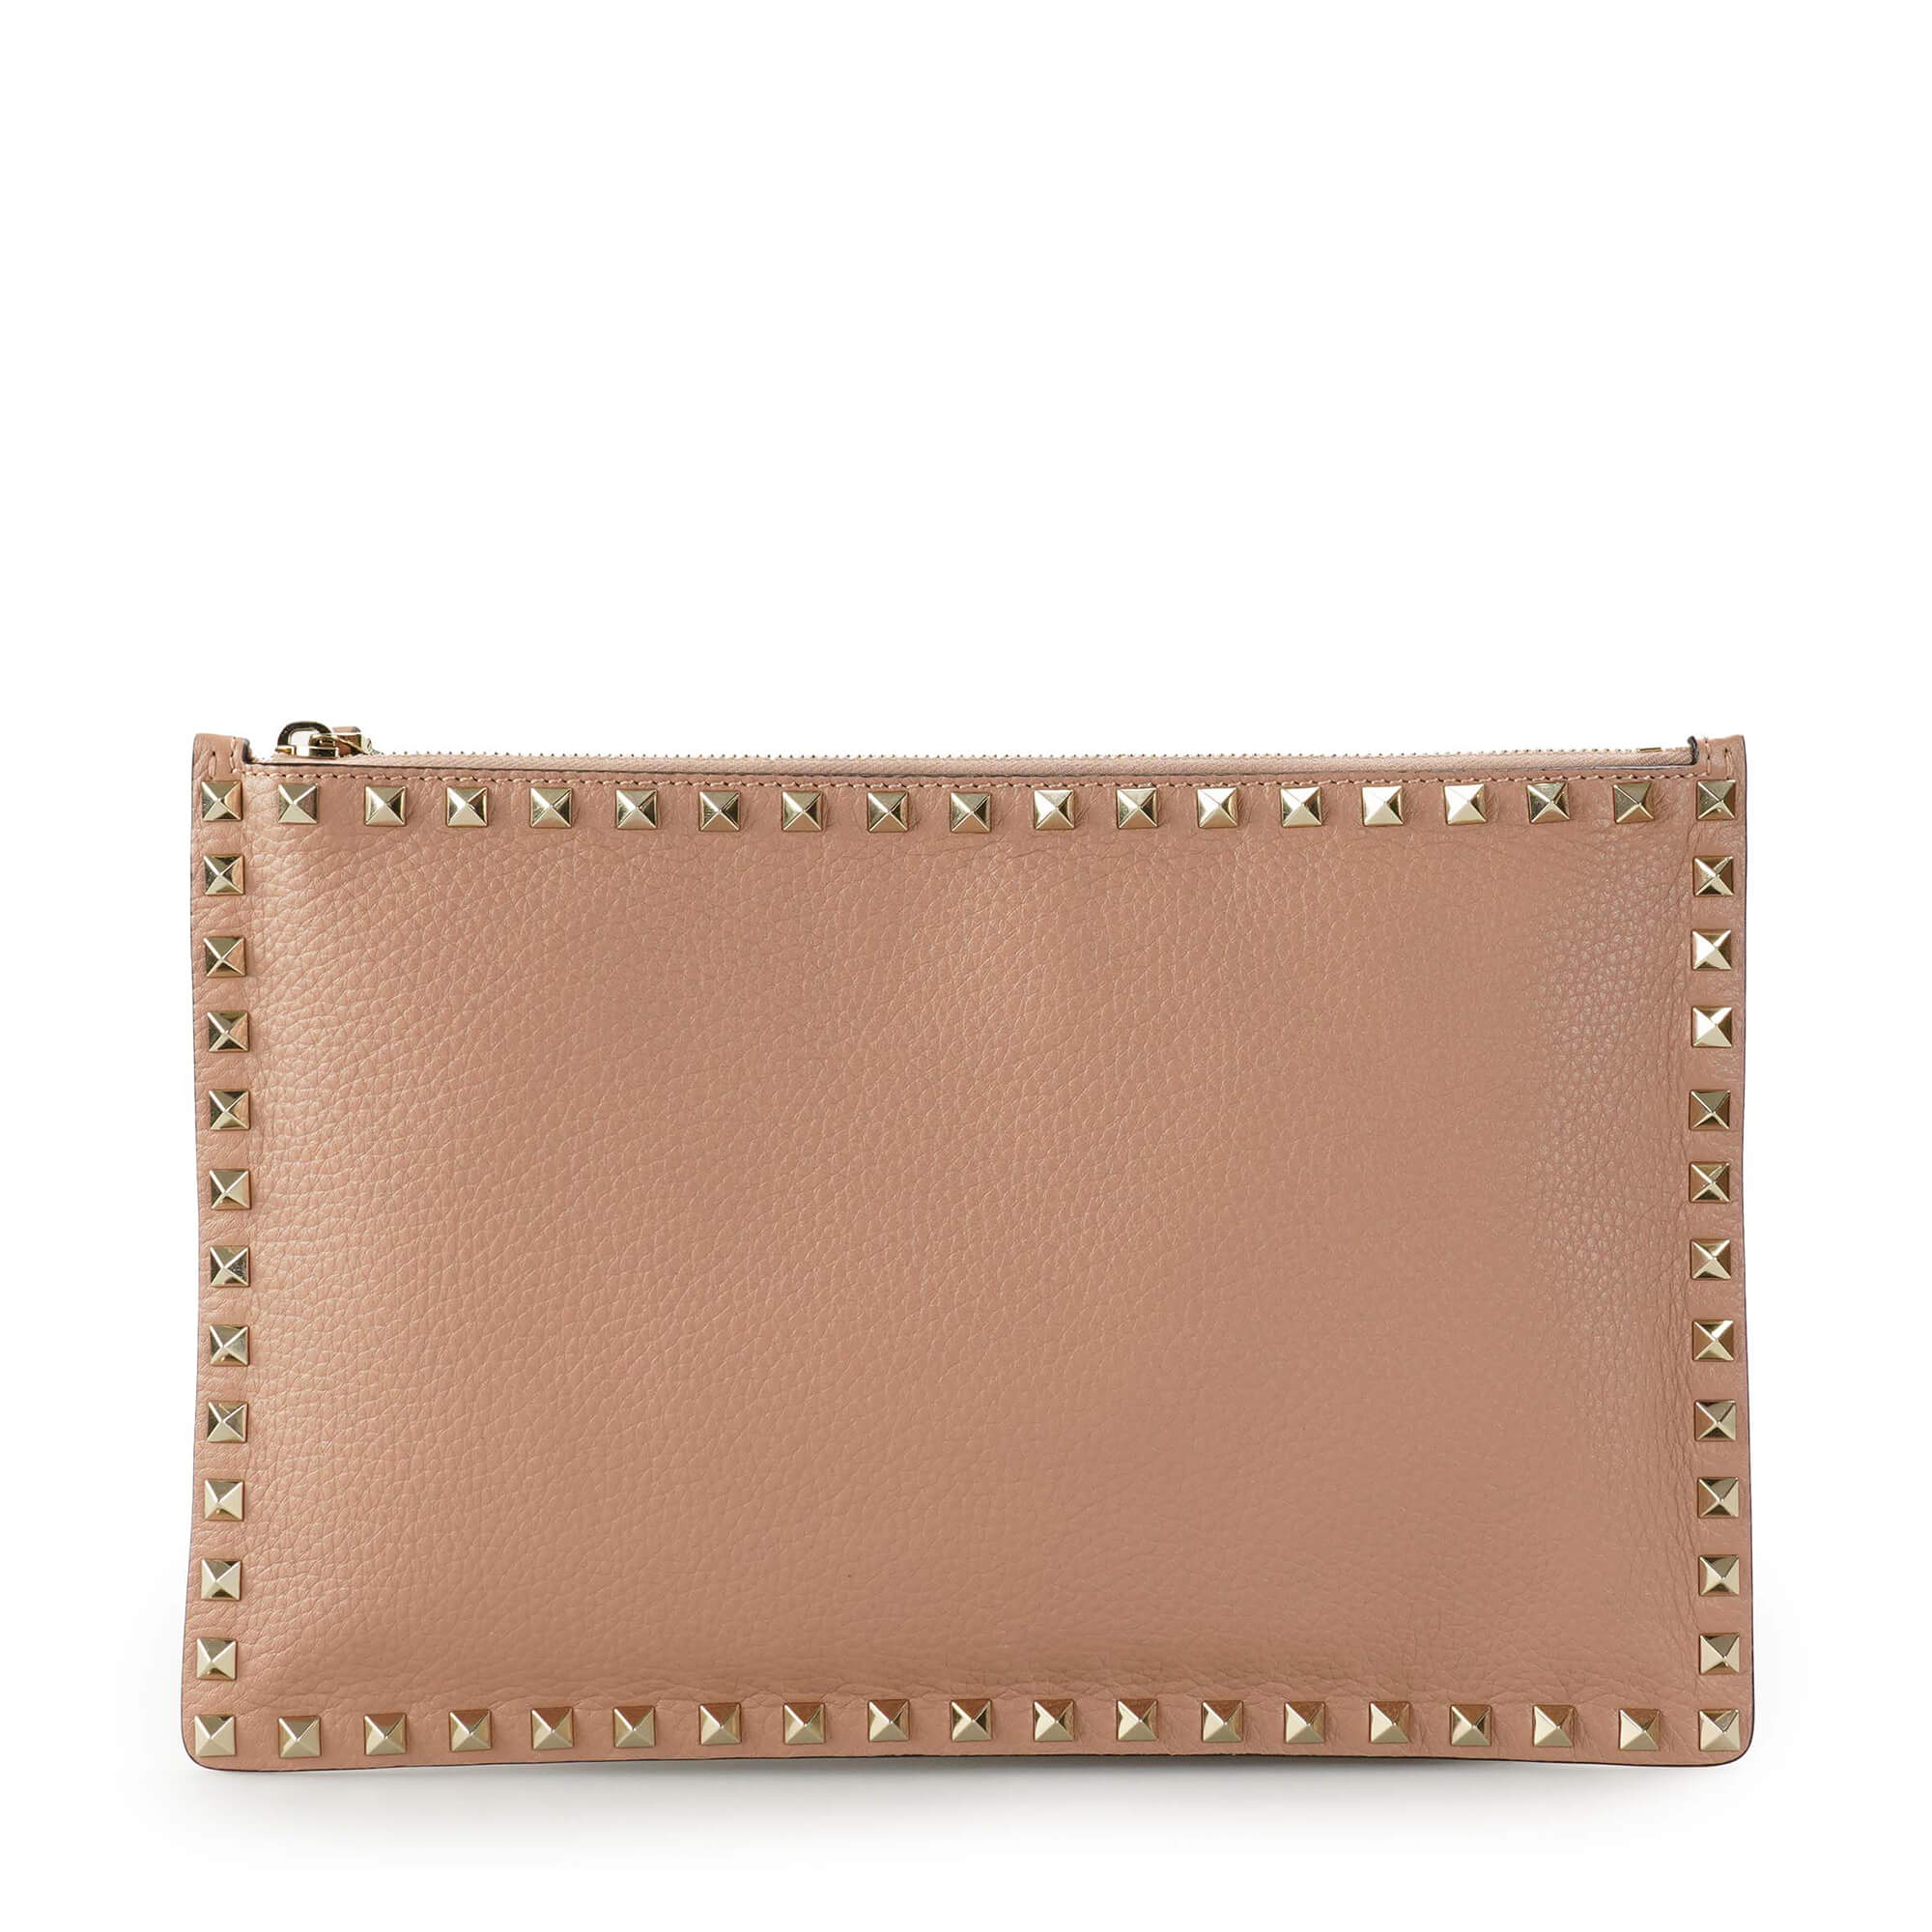 Valentino - Nude Grained Leather Rockstud Clutch 